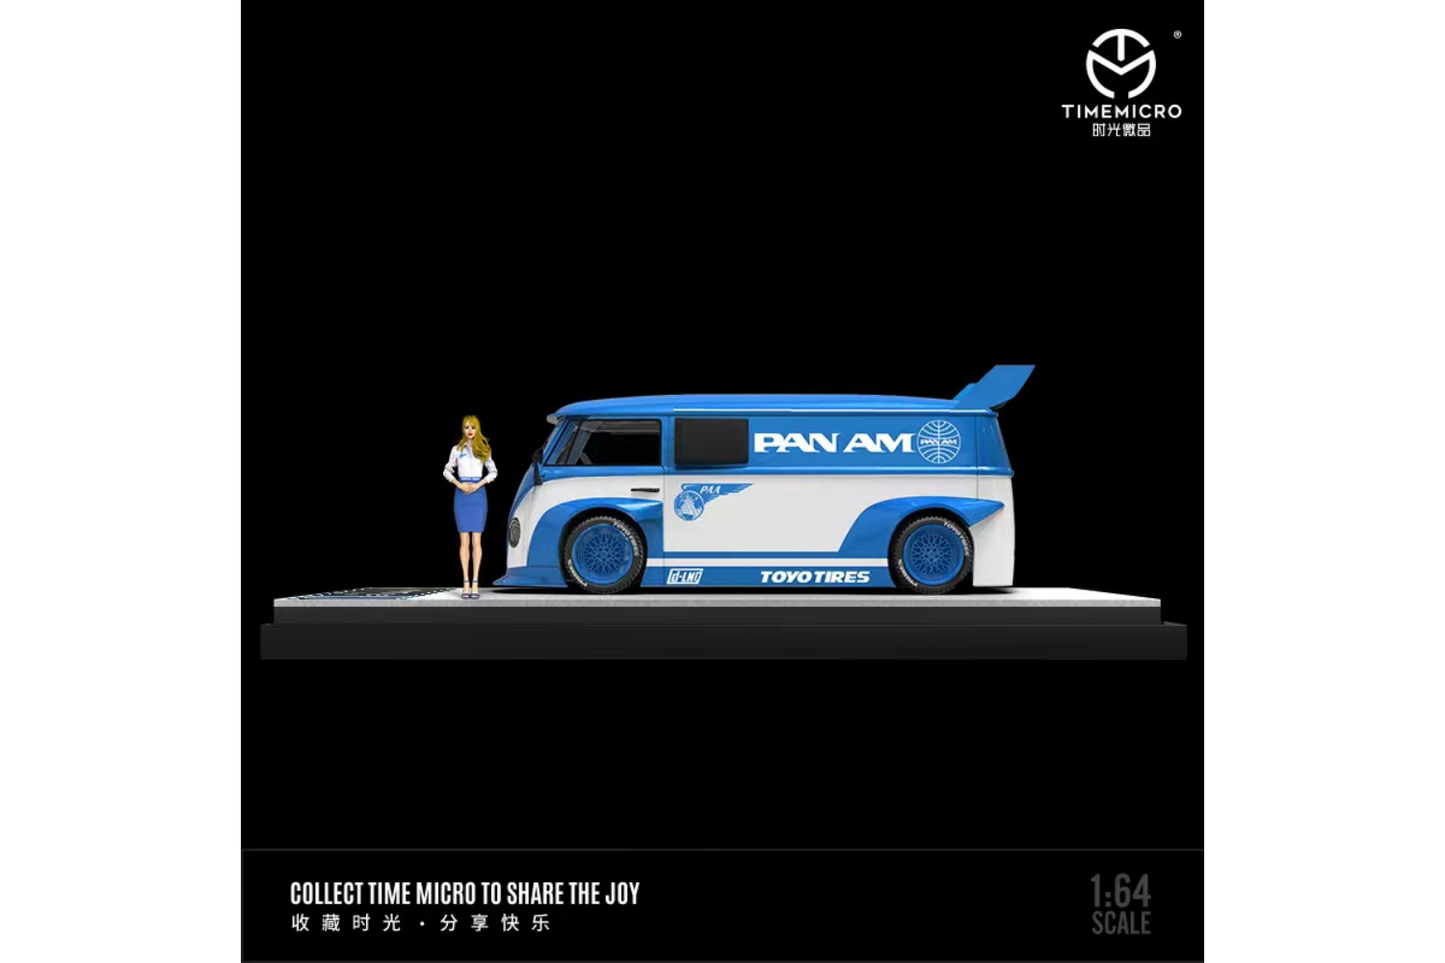 Time Micro 1/64 Volkswagen T1 Bus in Pan Am Blue Livery